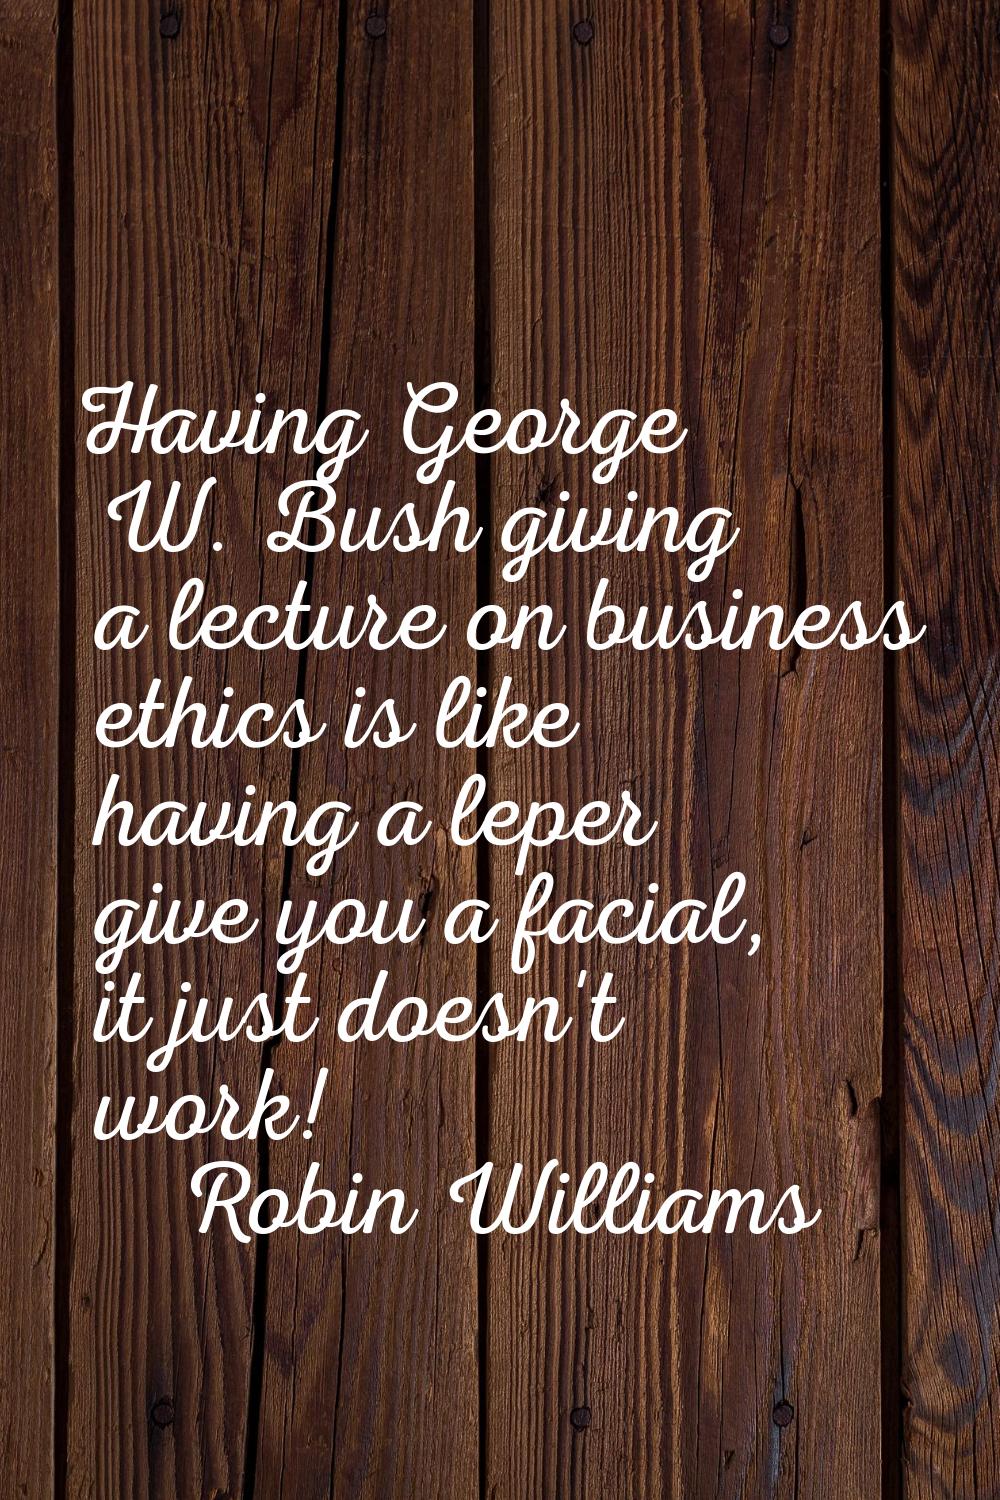 Having George W. Bush giving a lecture on business ethics is like having a leper give you a facial,